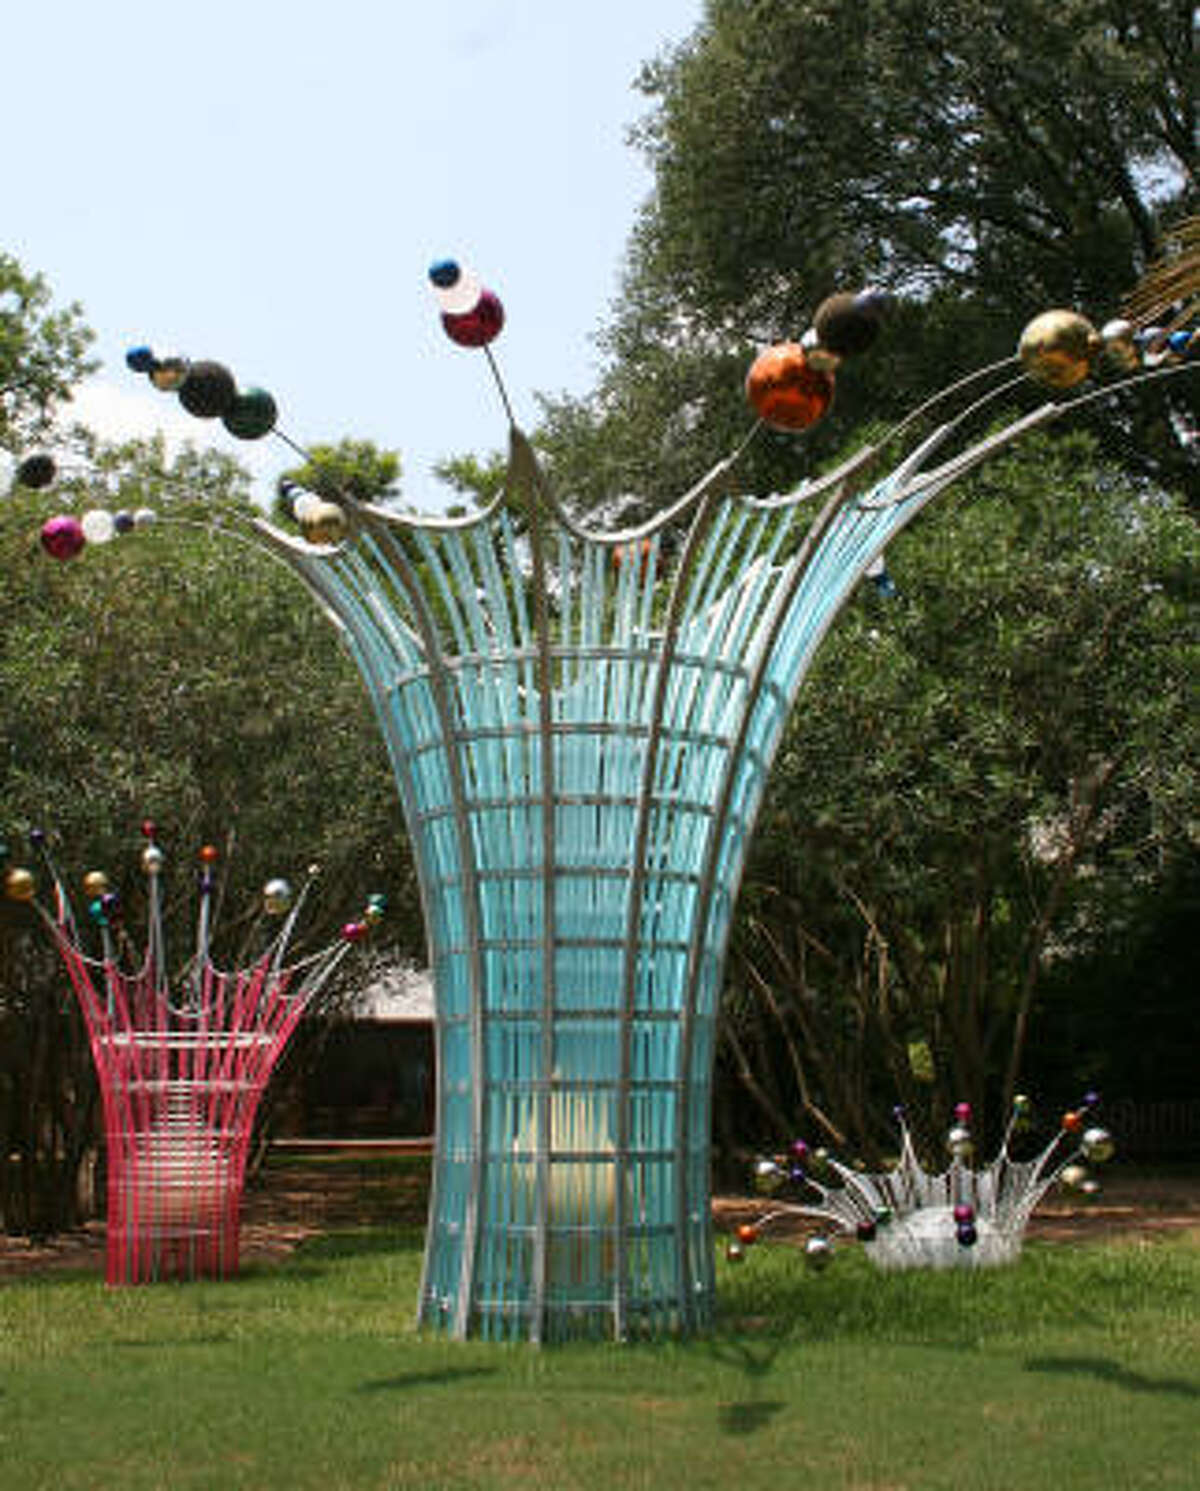 The Dennis Oppenheim creation includes three sculptures (from left) Splash (Tall Pink), Splash and Splash (Low White). The sculptures are made with colored stainless-steel globes, powder-coated steel, stainless-steel ties and acrylic.